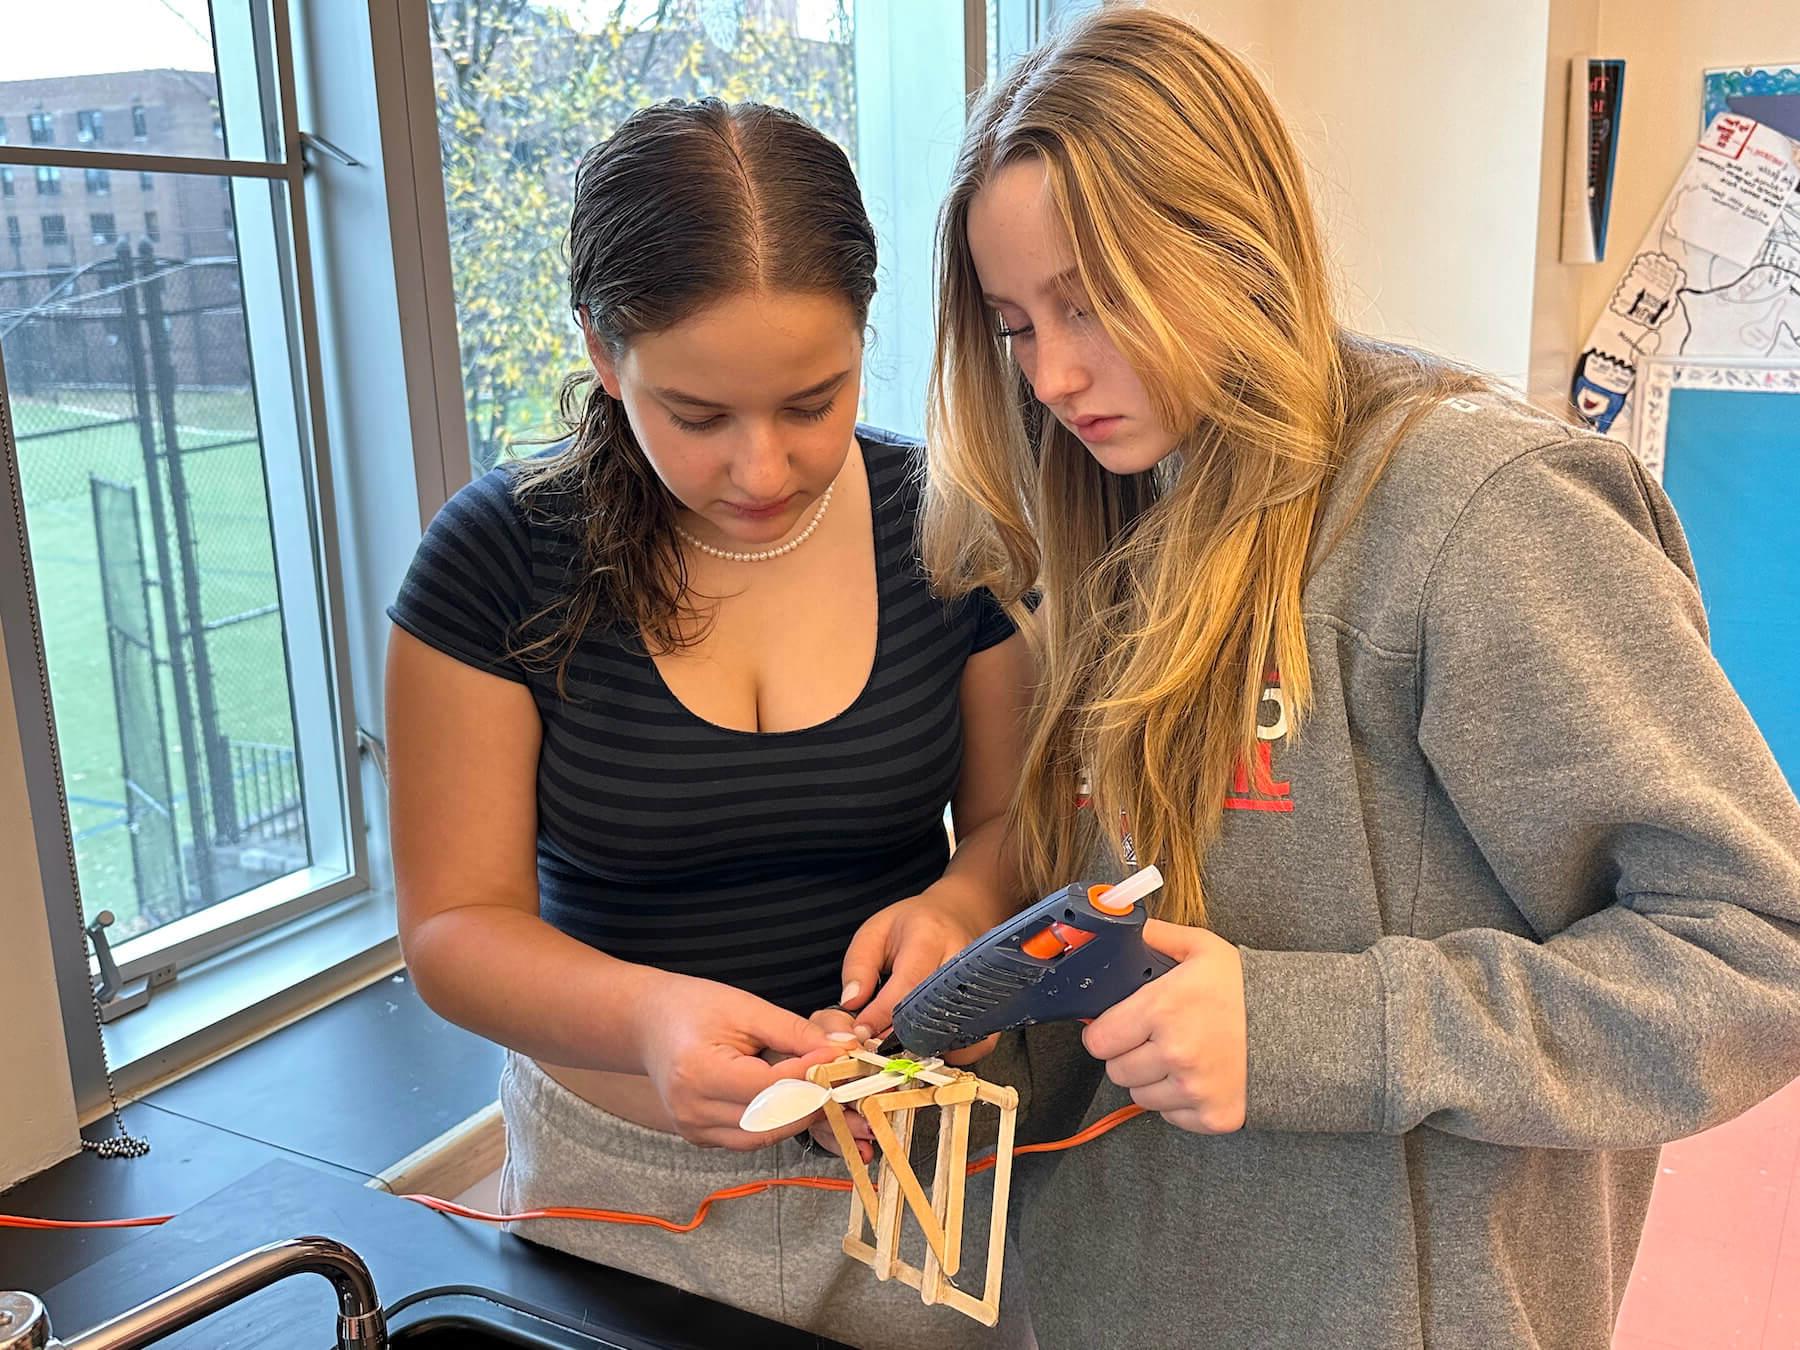 Ethical Culture Fieldston School students in Fieldston Middle building an experiment in science class